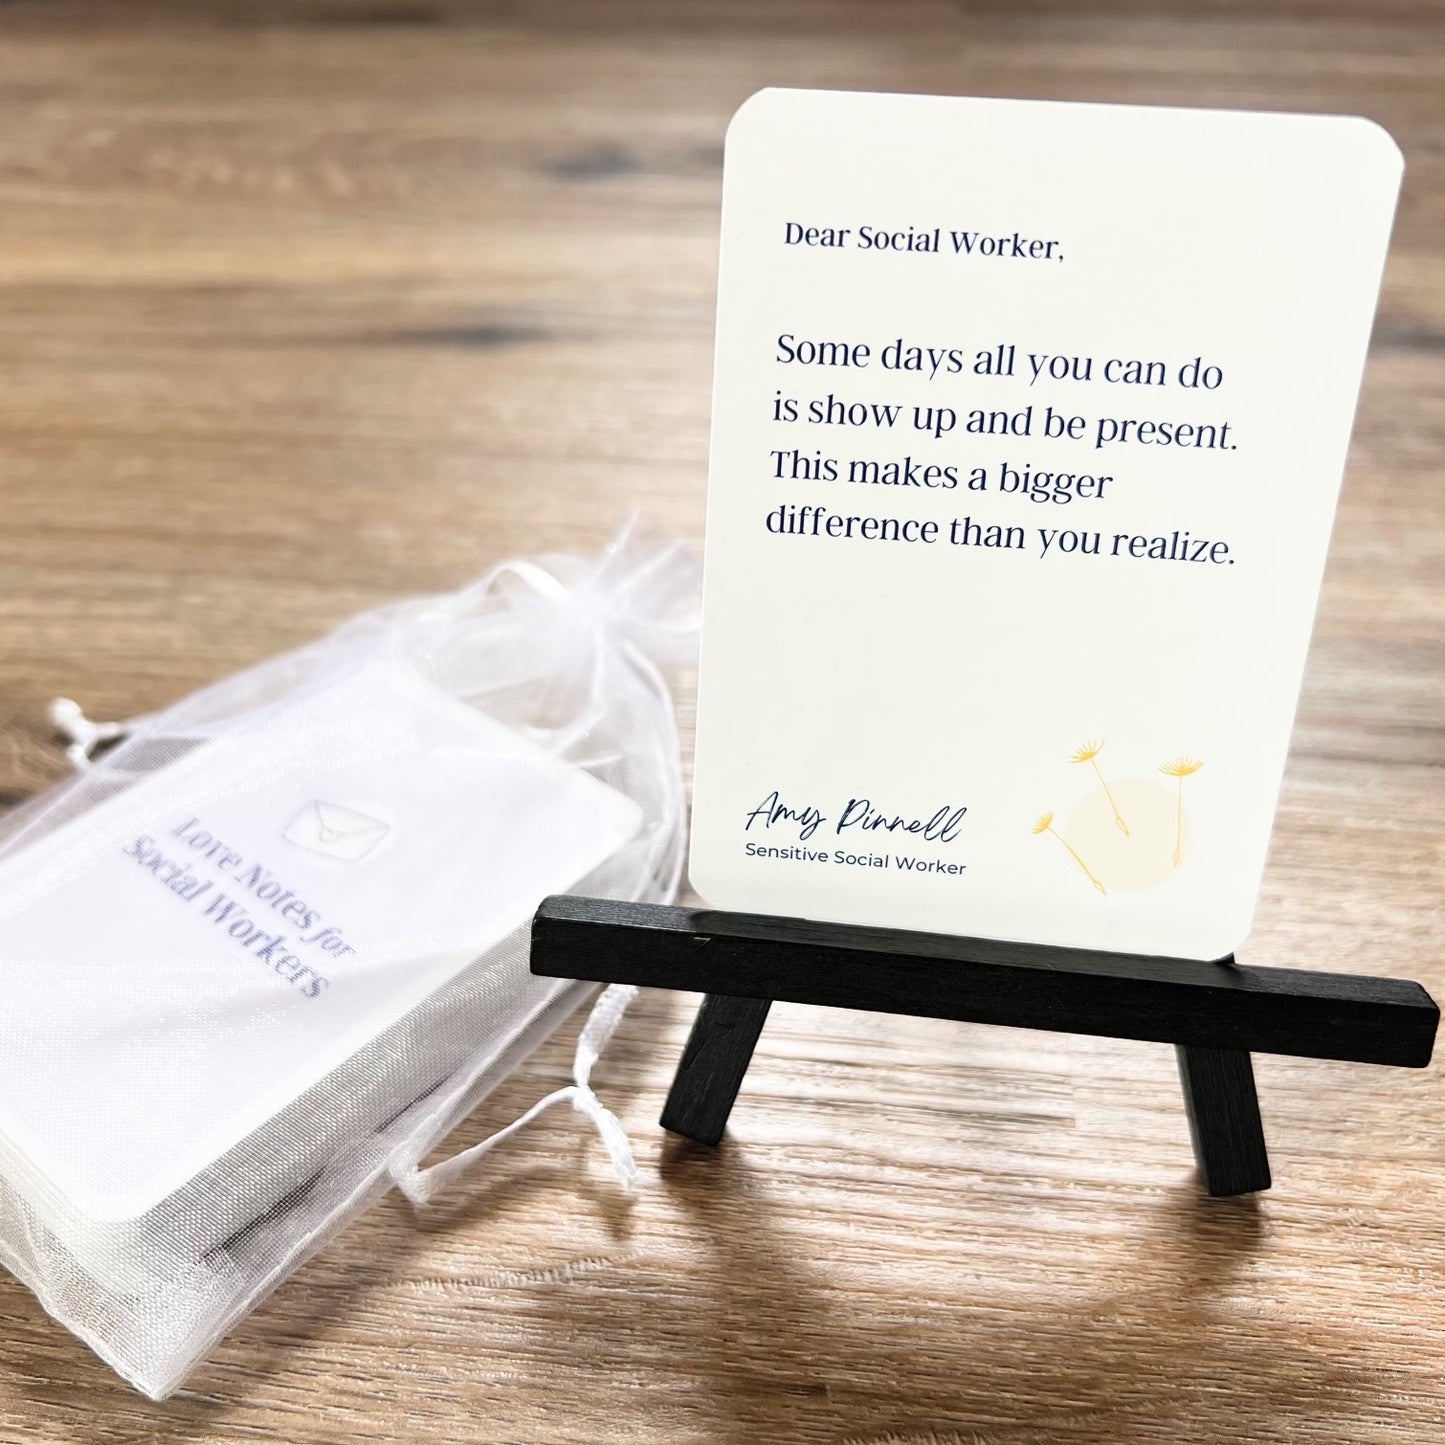 A single card is displayed on a small black stand. The card shows the message "Dear Social Worker, Some days all you can do is show up and be present. This makes a bigger difference than you realize". It is signed by Amy Pinnell, Sensitive Social Worker and includes a drawing of 3 yellow dandelion seeds. The rest of the card deck can be seen stacked inside a white organza bag behind the stand. The back of the card deck reads "Love Notes for Social Workers".  